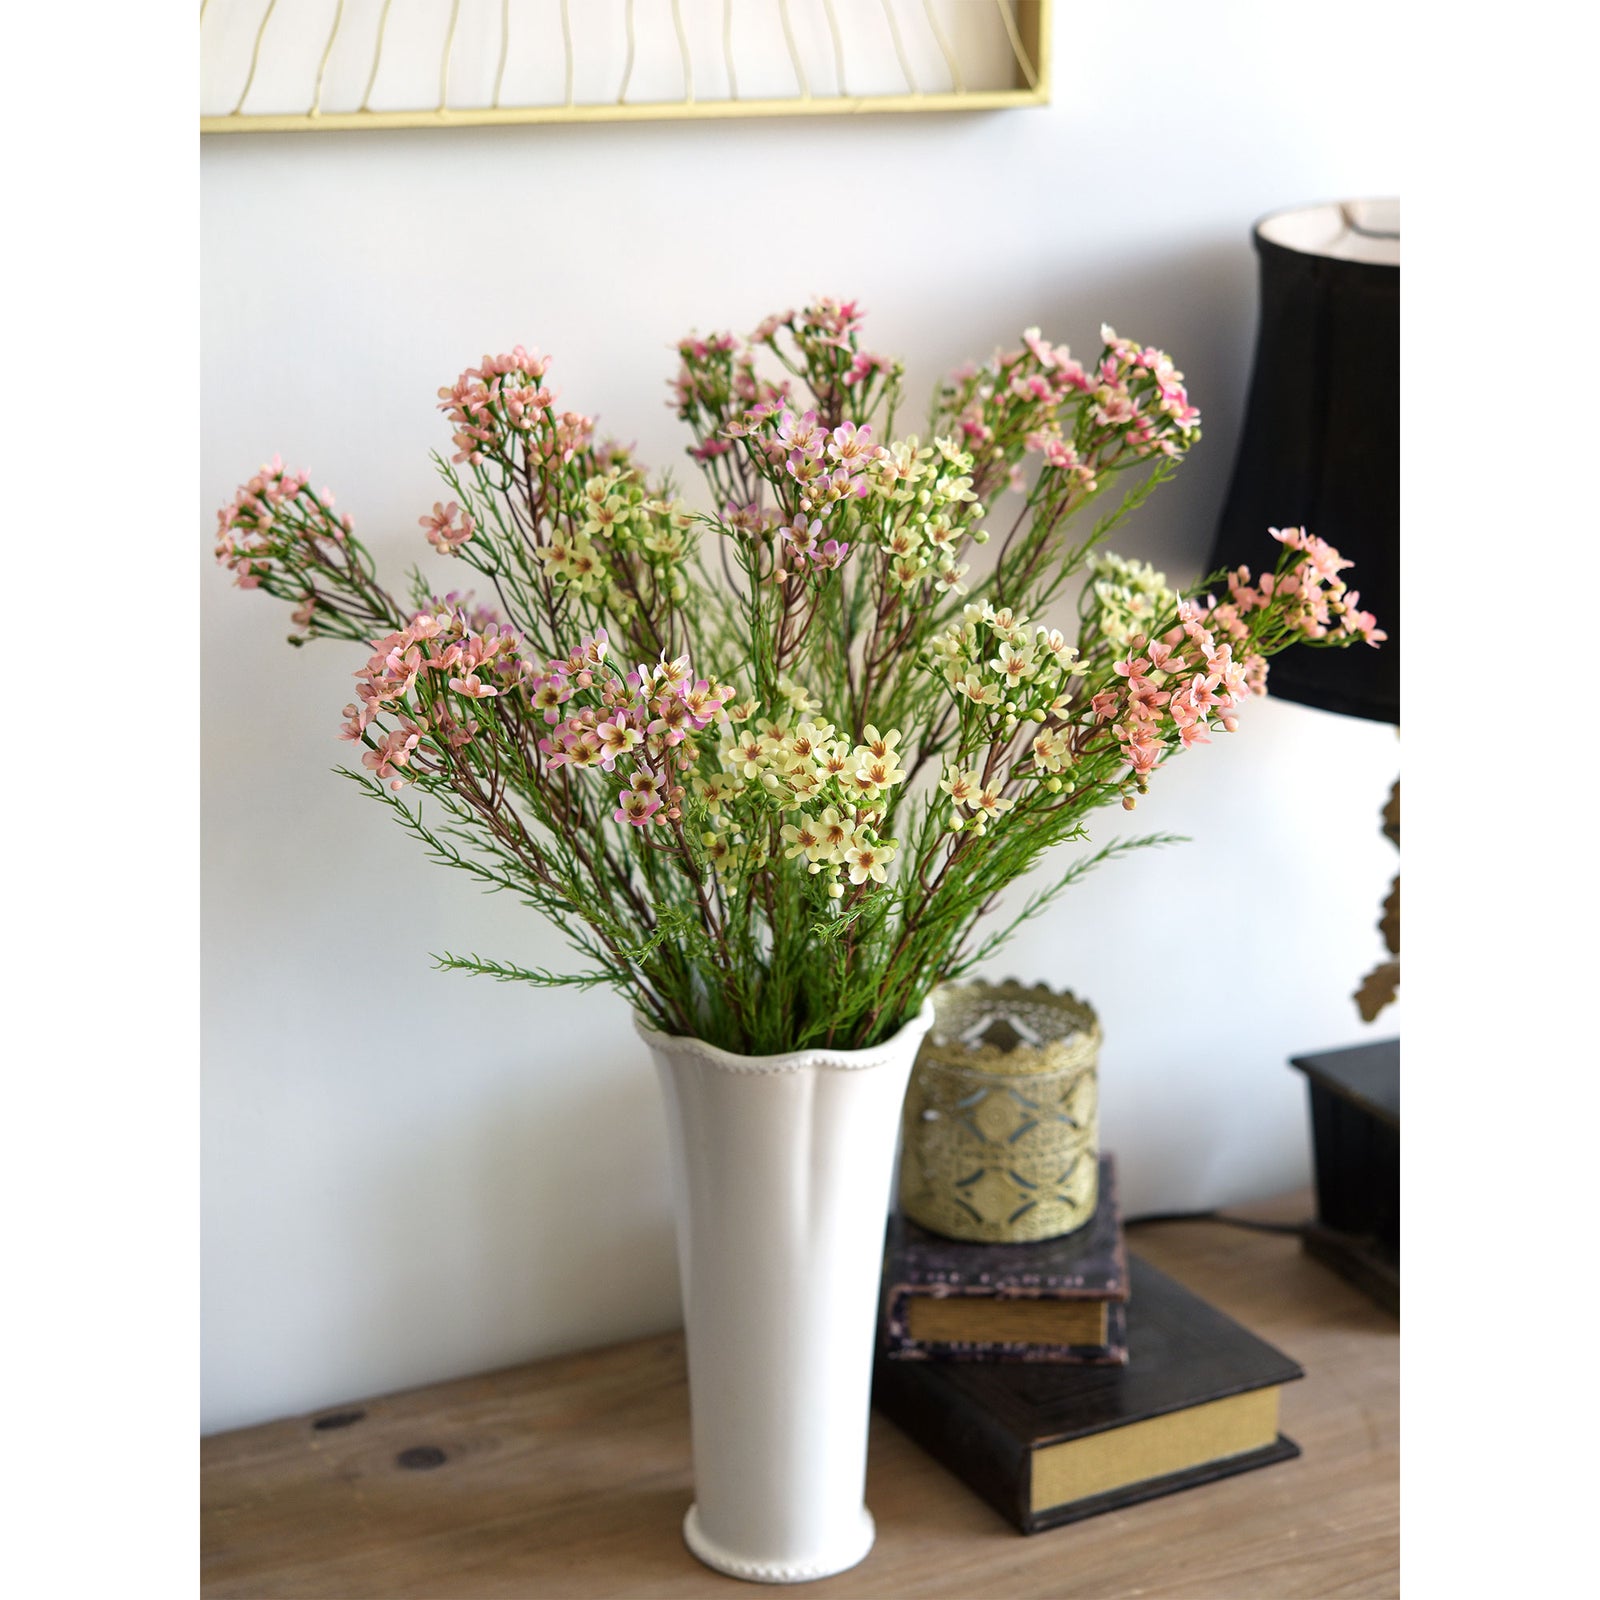 Coral Pink Timeless Charm Wax Flowers, Long Stem Artificial Silk Flowers 6 Stems 2.6ft (78cm) Tall